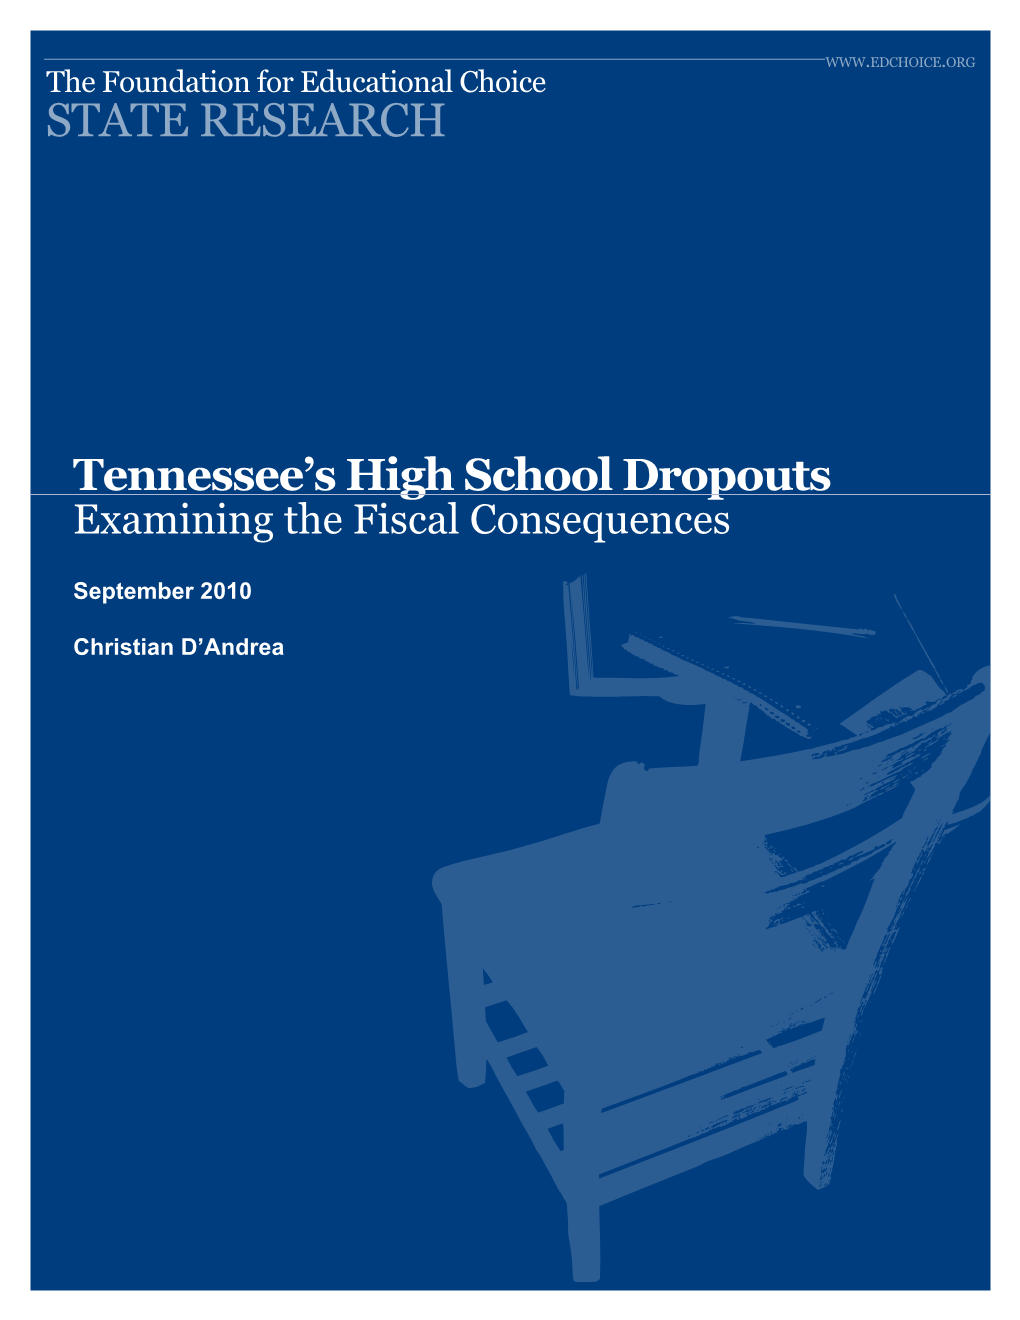 Tennessee's High School Dropouts